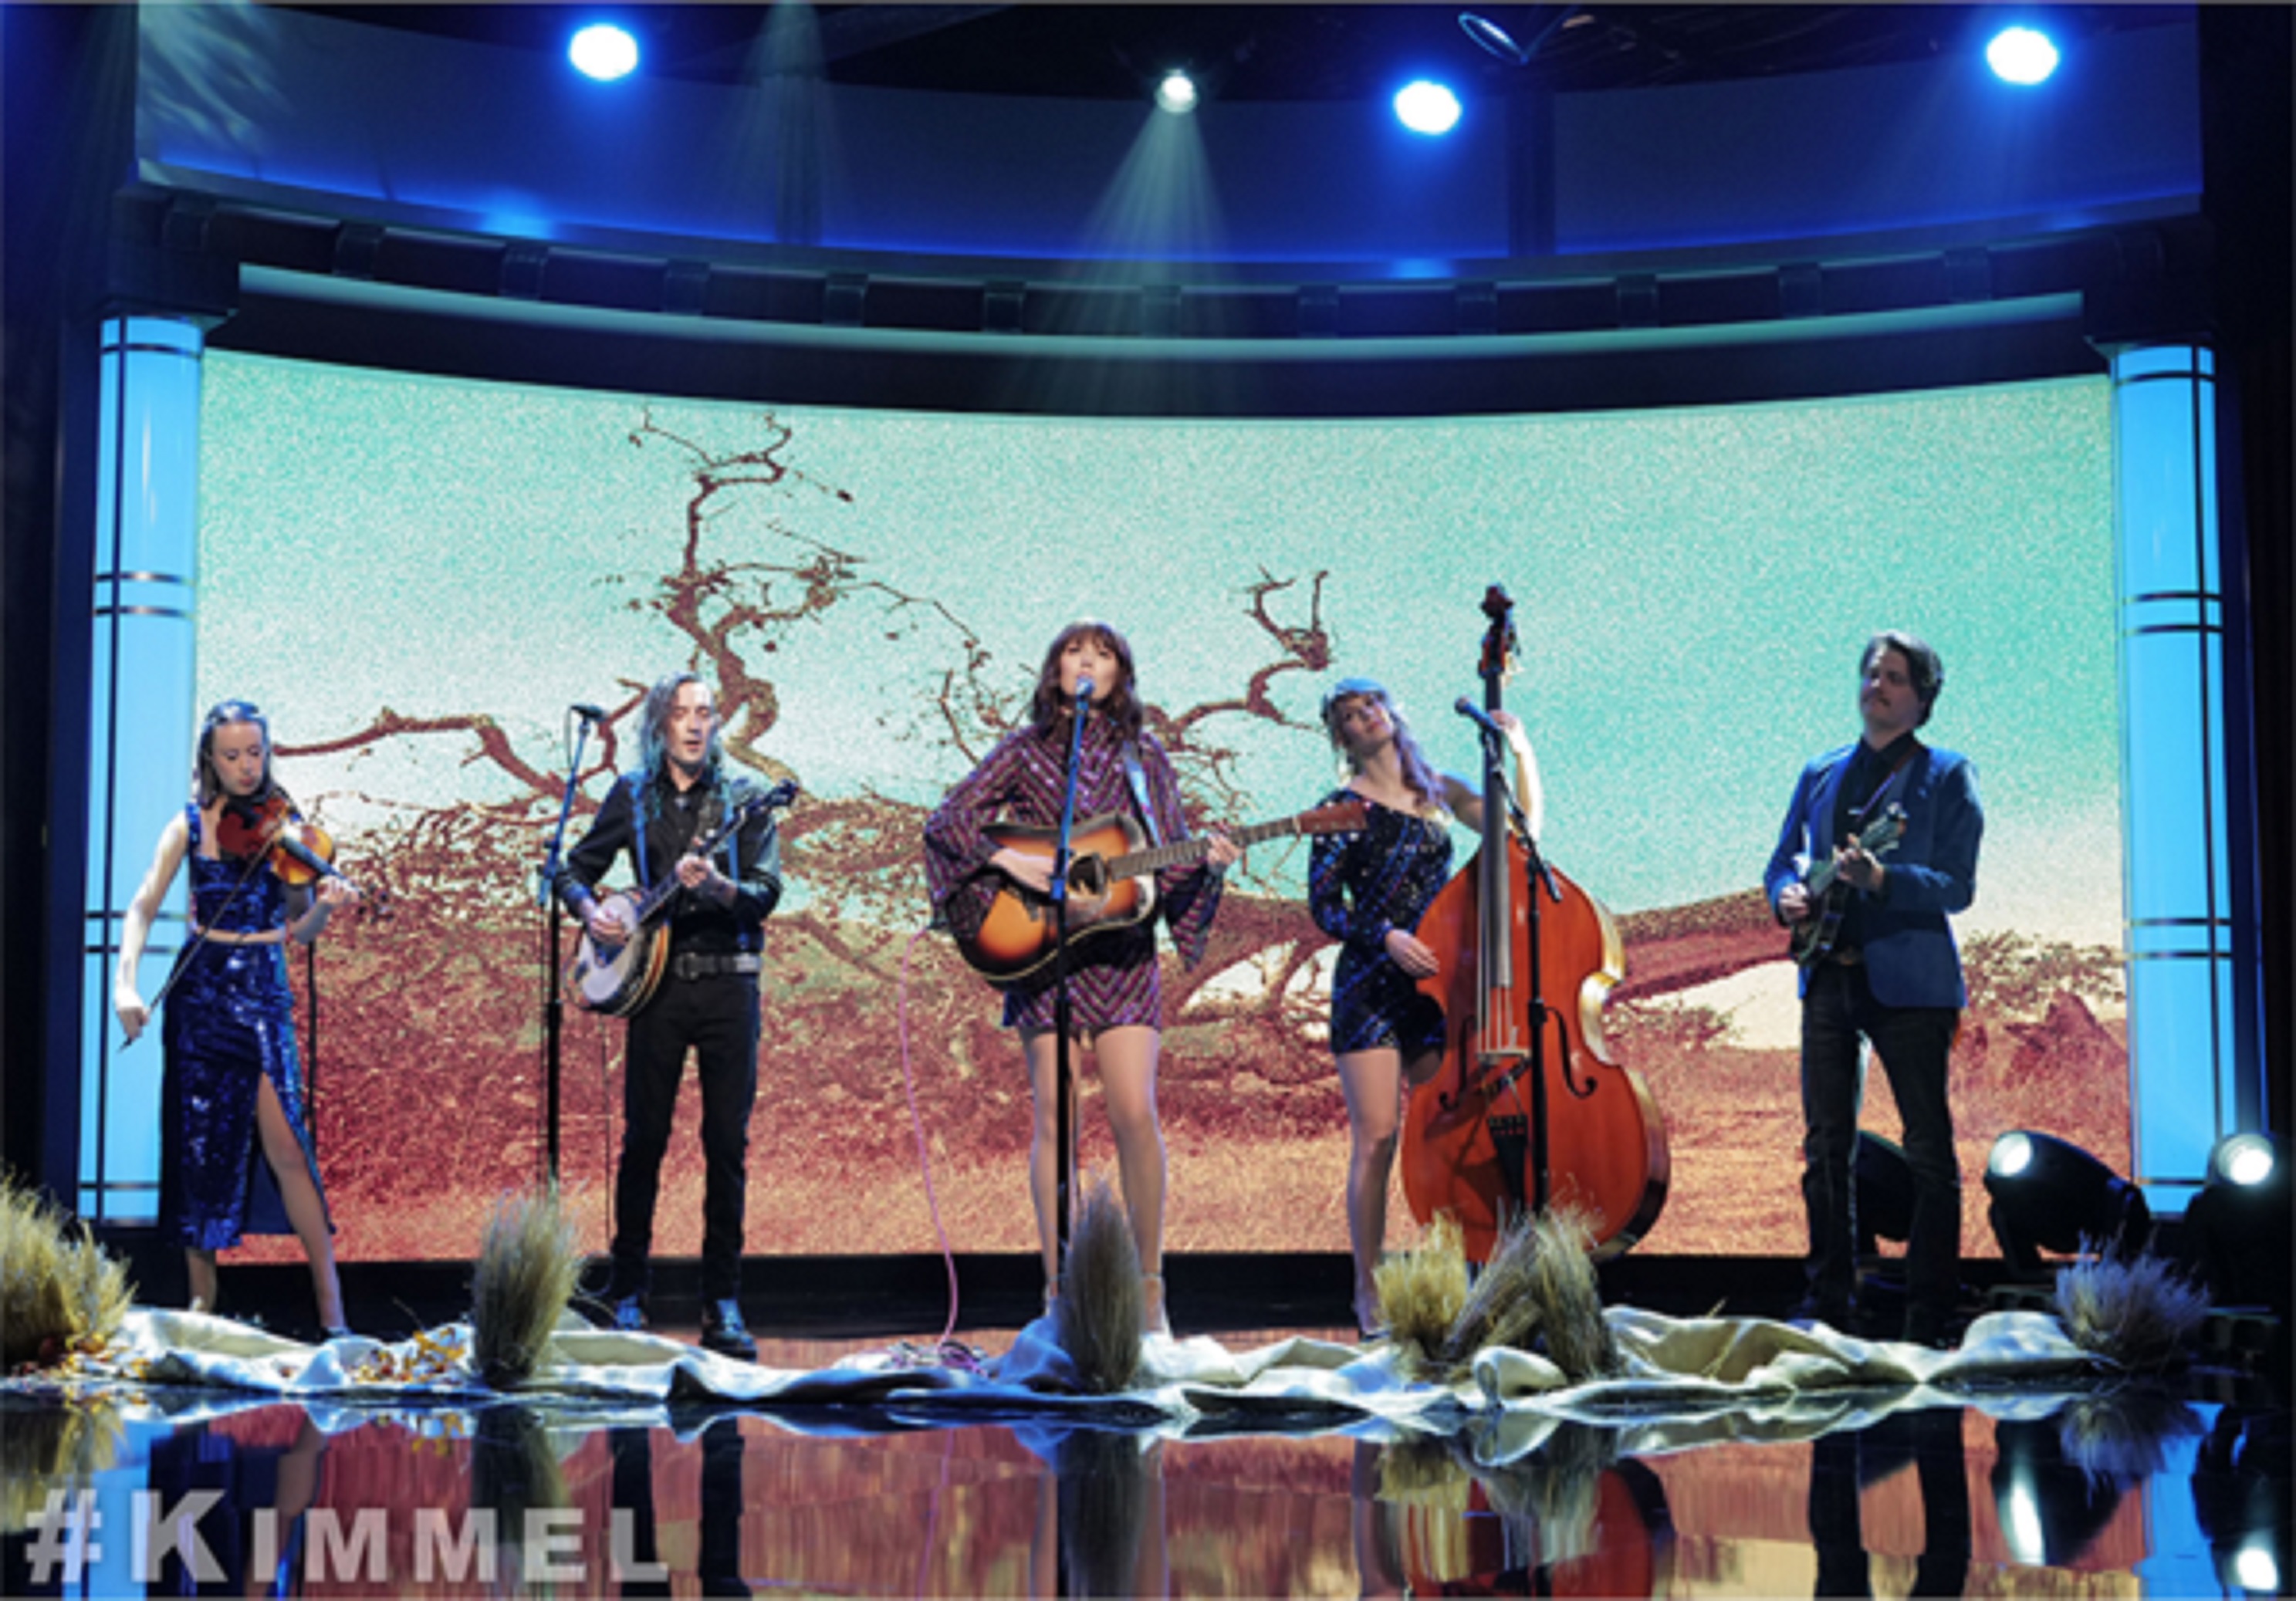 Molly Tuttle & Golden Highway perform “Crooked Tree” on “Jimmy Kimmel Live!”